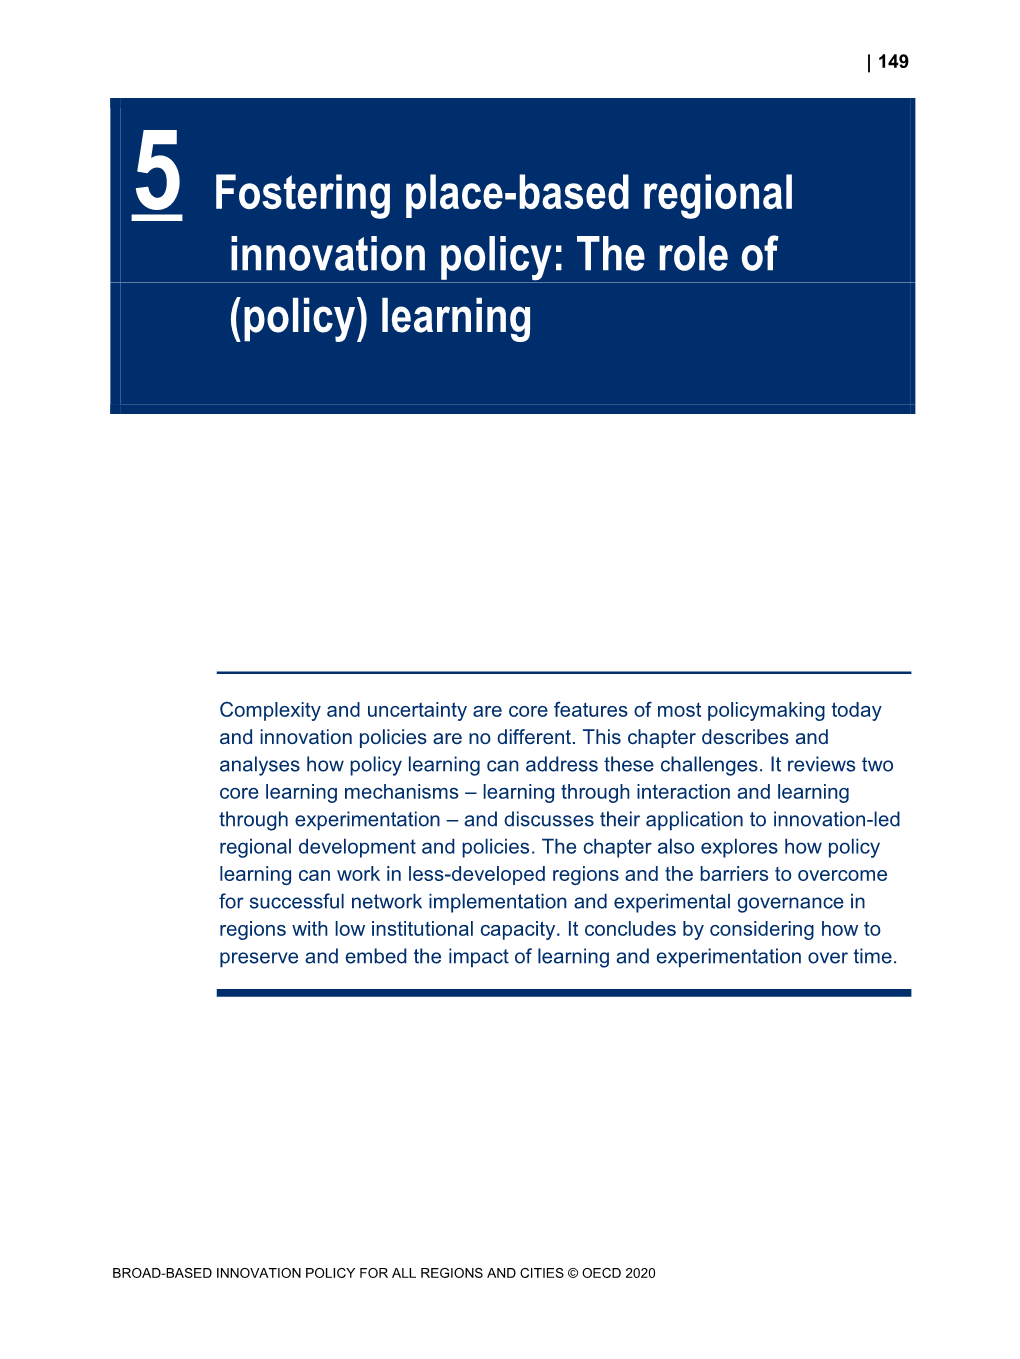 5 Fostering Place-Based Regional Innovation Policy: the Role of (Policy) Learning